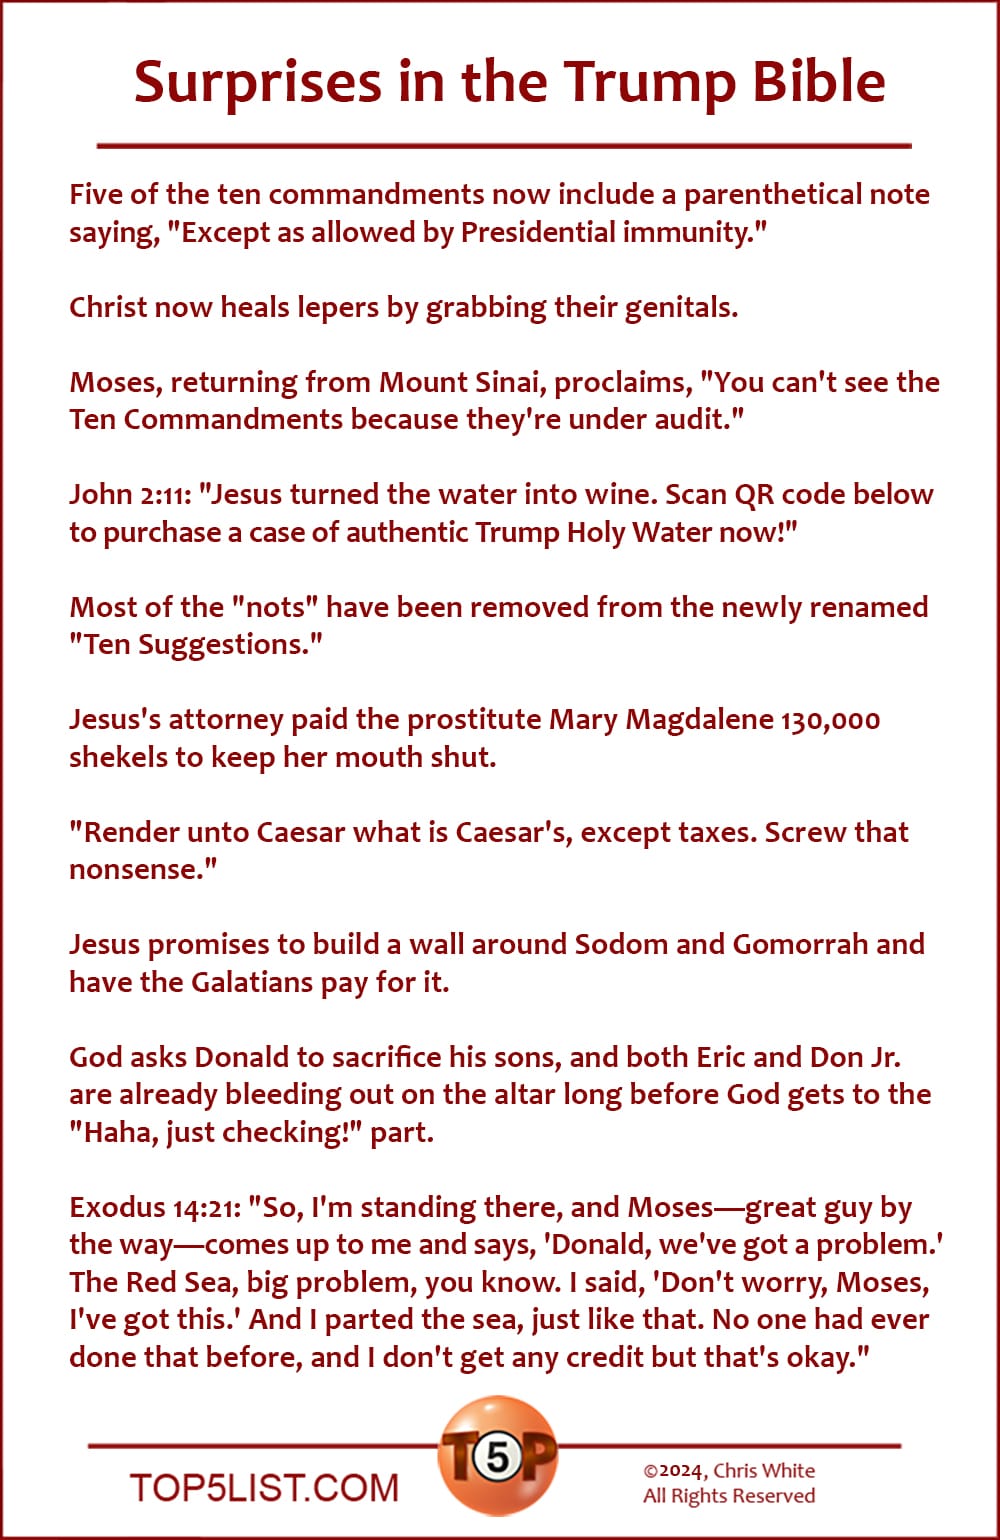 Surprises in the Trump Bible  |   Five of the ten commandments now include a parenthetical note saying, "Except as permitted by Presidential immunity."  Christ now heals lepers by grabbing their genitals.  Moses, returning from Mount Sinai, proclaims, "You can't see the Ten Commandments because they're under audit."  John 2:11: "Jesus turned the water into wine. Scan QR code below to purchase a case of authentic Trump Holy Water now!"  Most of the "nots" have been removed from the newly renamed "Ten Suggestions."  Jesus's attorney paid the prostitute Mary Magdalene 130,000 shekels to keep her mouth shut.  "Render unto Caesar what is Caesar's, except taxes. Screw that nonsense."  Jesus promises to build a wall around Sodom and Gomorrah and have the Galatians pay for it.  God asks Donald to sacrifice his sons, and both Eric and Don Jr. are already bleeding out on the altar long before God gets to the "Haha, just checking!" part.  Exodus 14:21: "So, I'm standing there, and Moses—great guy by the way—comes up to me and says, 'Donald, we've got a problem.' The Red Sea, big problem, you know. I said, 'Don't worry, Moses, I've got this.' And I parted the sea, just like that. No one had ever done that before, and I don't get any credit but that's okay."